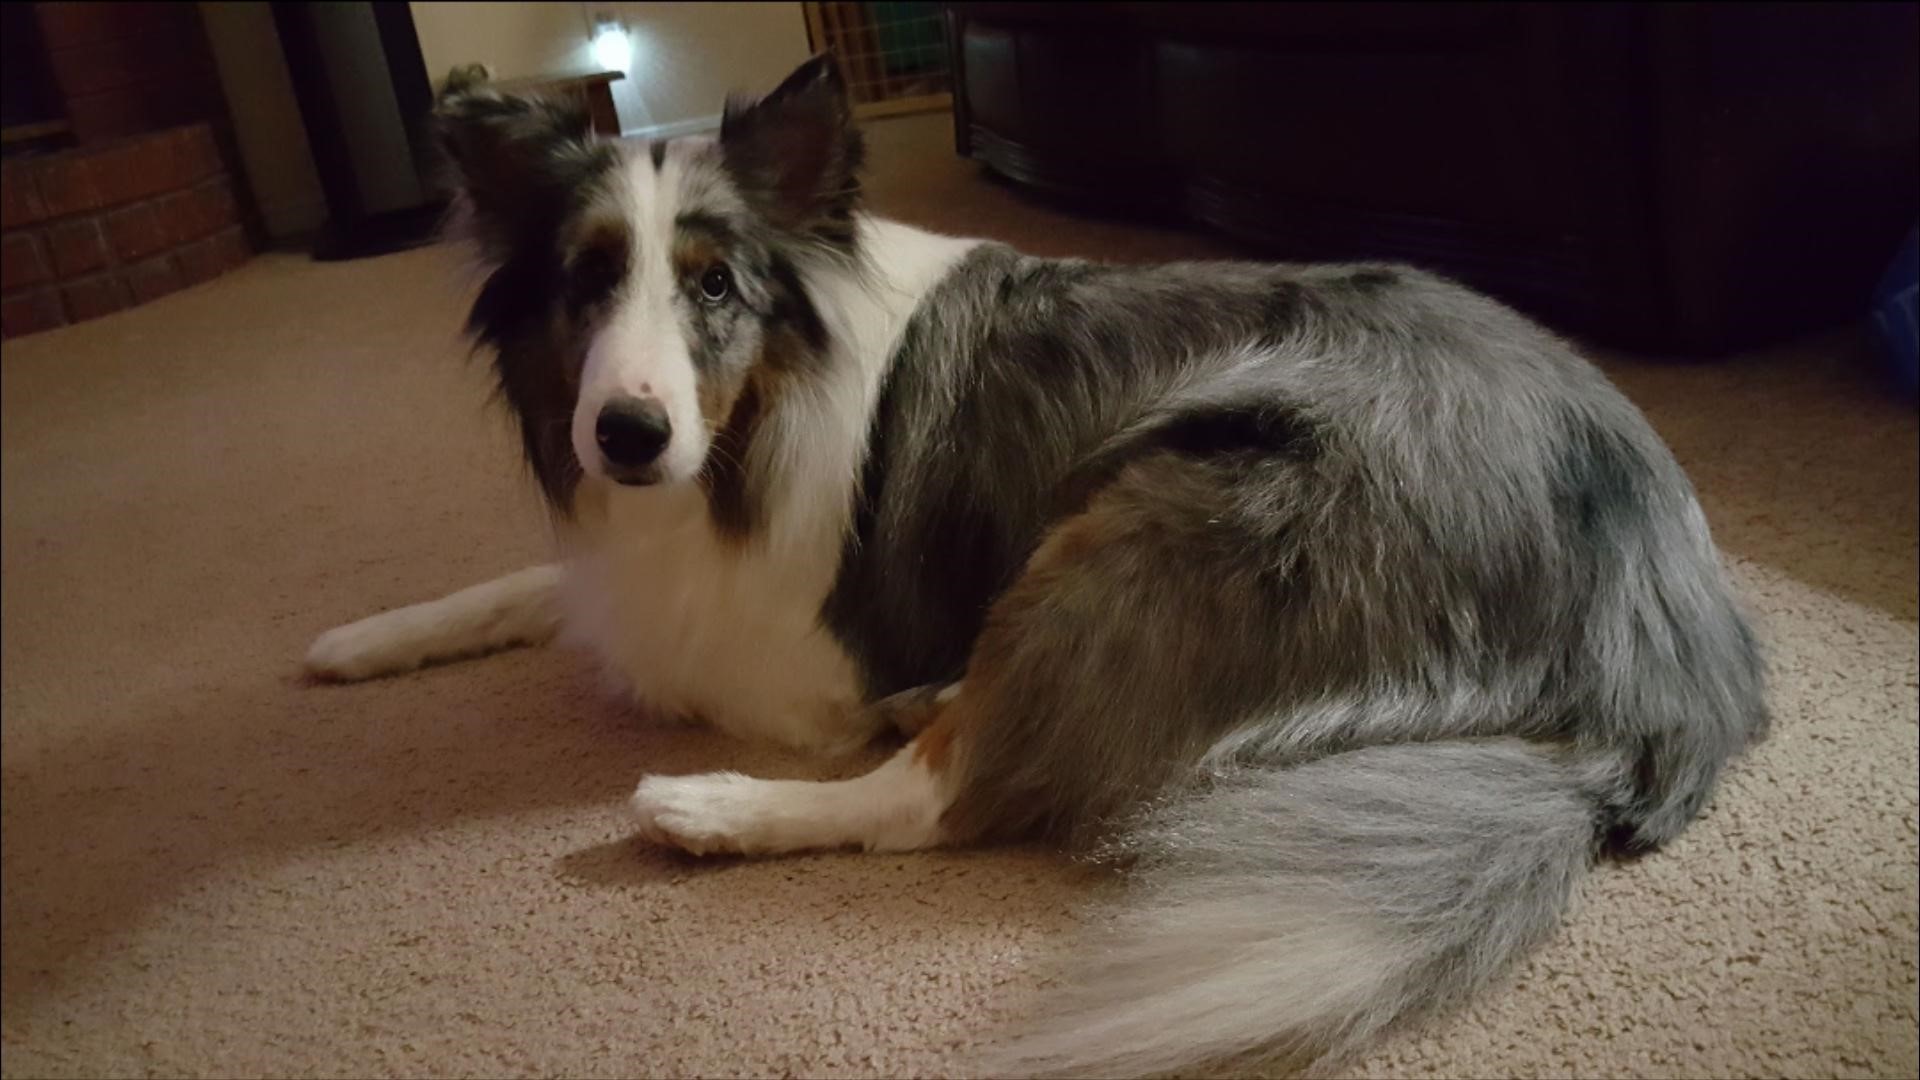 Meagan Jackson, Harley's owner, said the blue merle sheltie helps her 8-year-old son Conner. Conner is nonverbal because of a disabilty. The dog played a huge role in comforting Conner when he's feeling low.